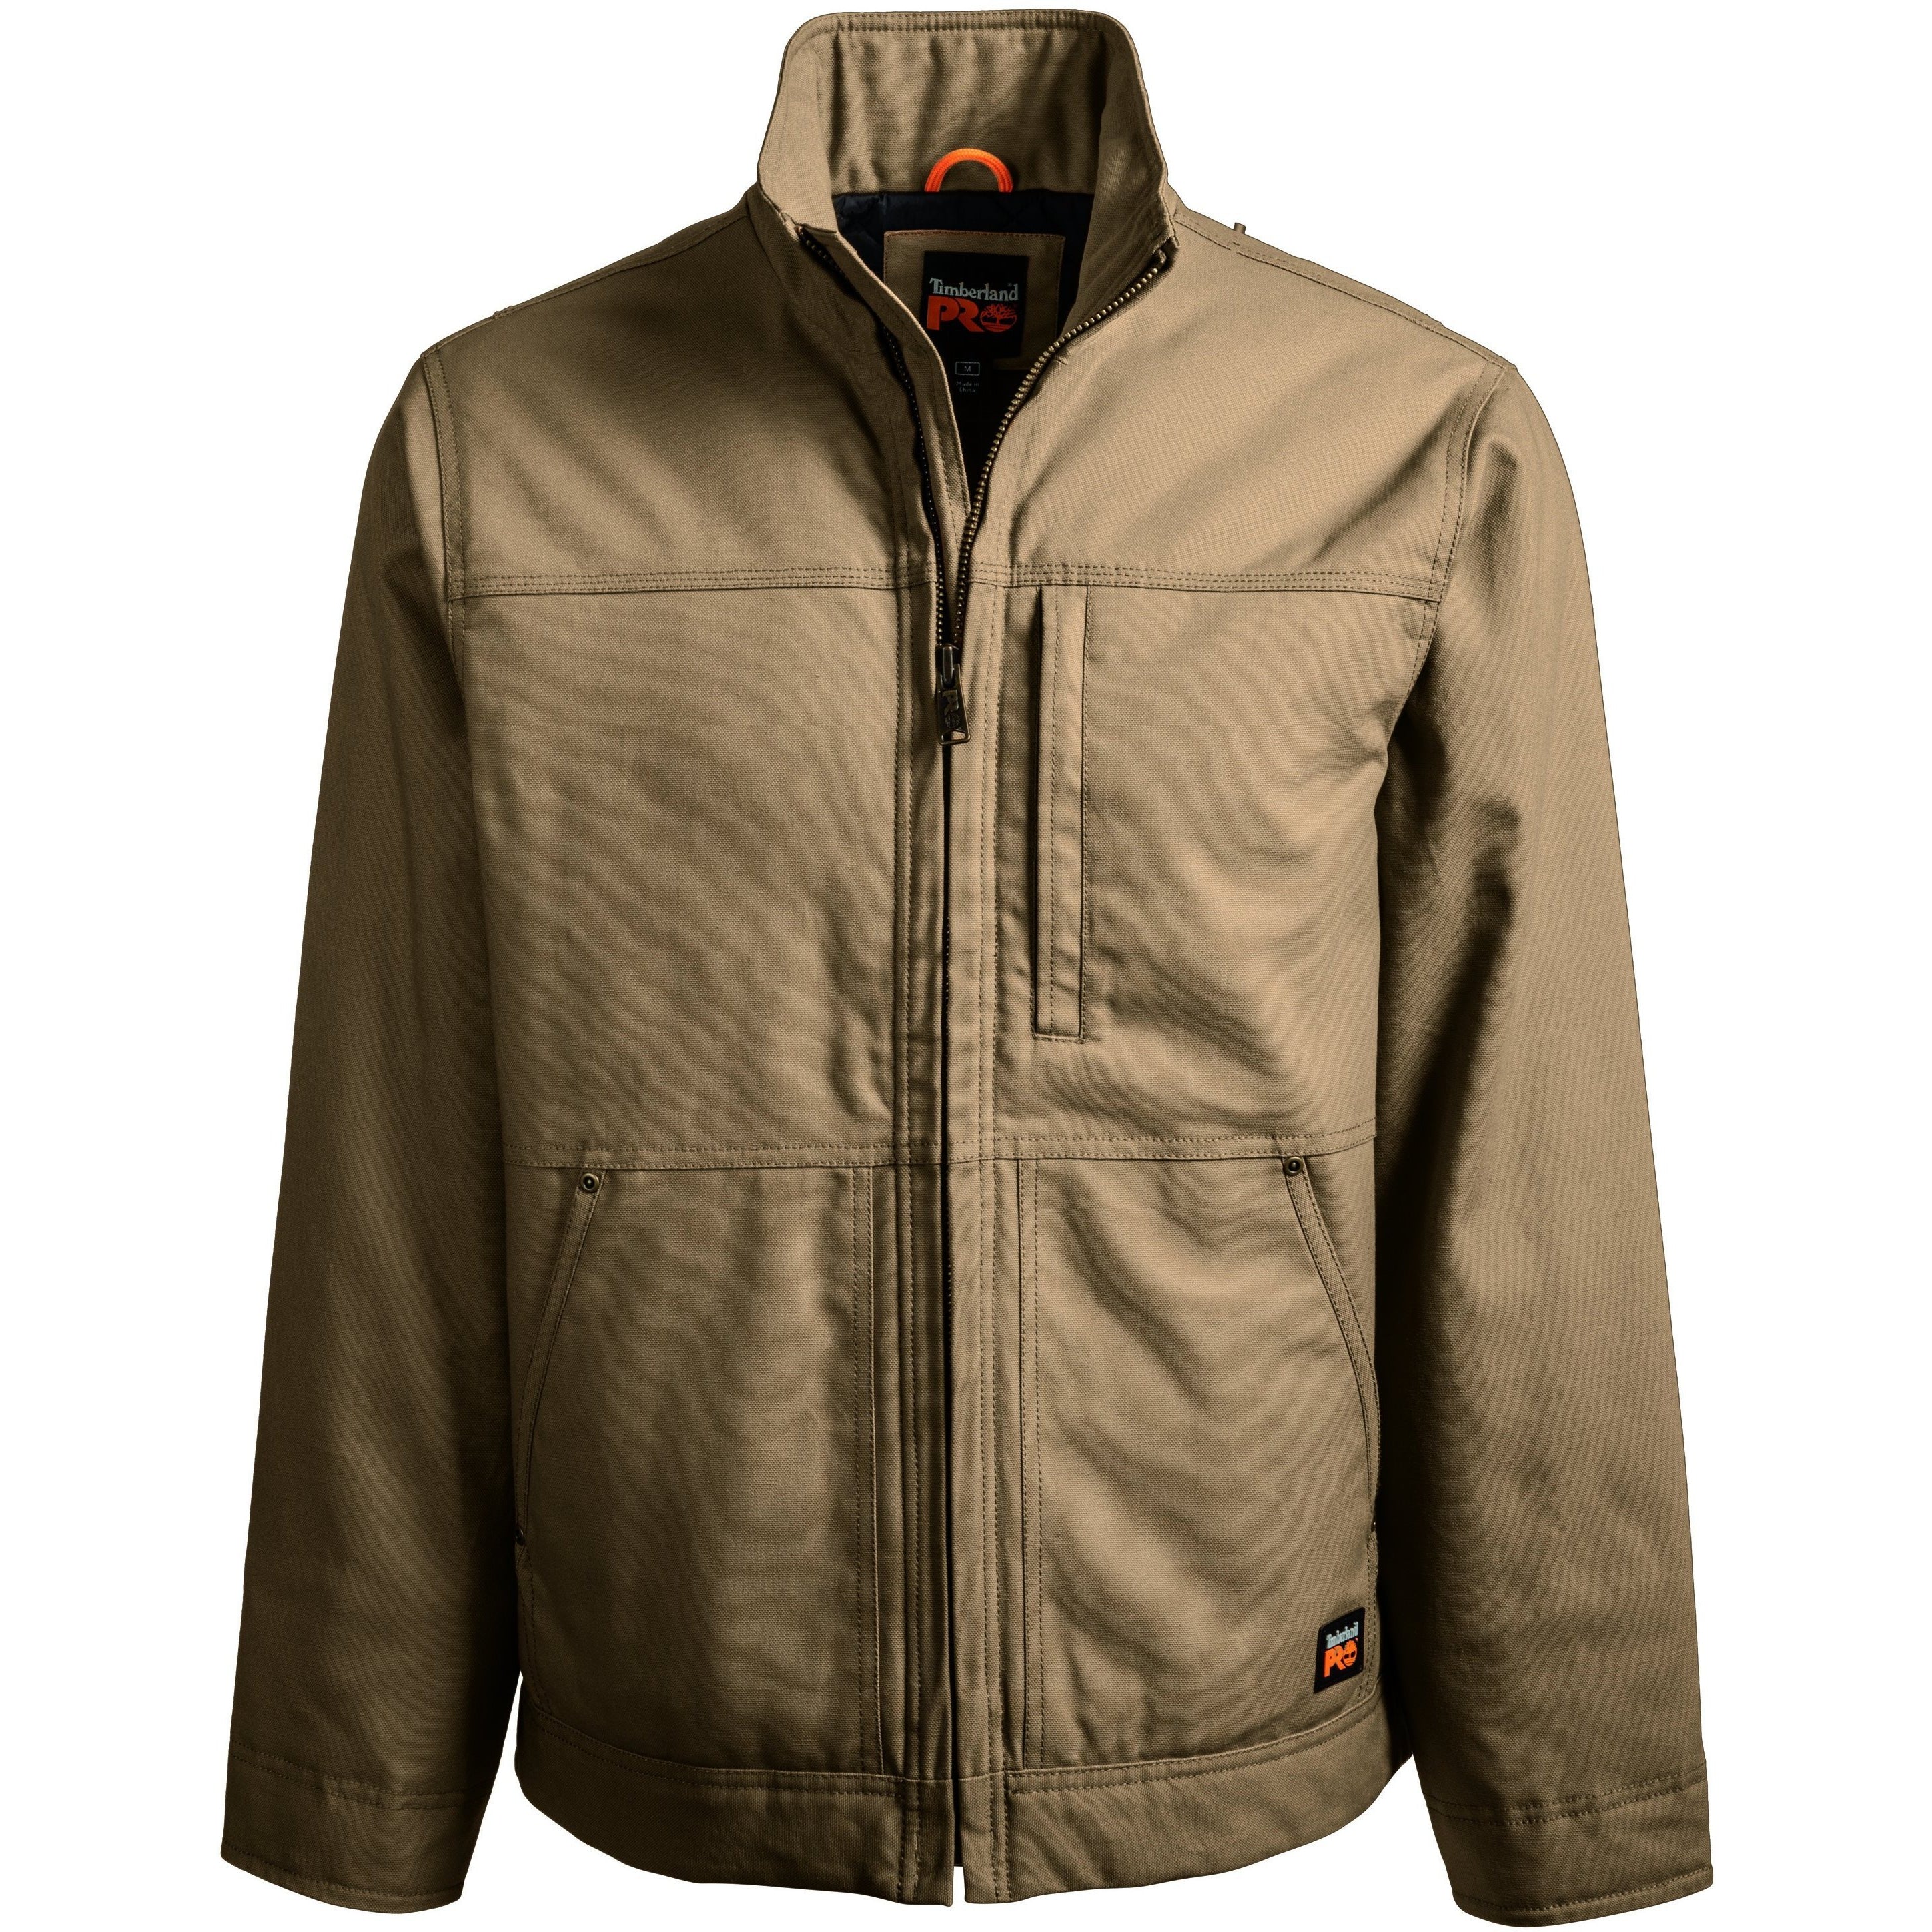 Timberland Pro Men's Stand Up Collar Balluster Work Jacket TB0A1OUJD02 Small / Dark Wheat - Overlook Boots